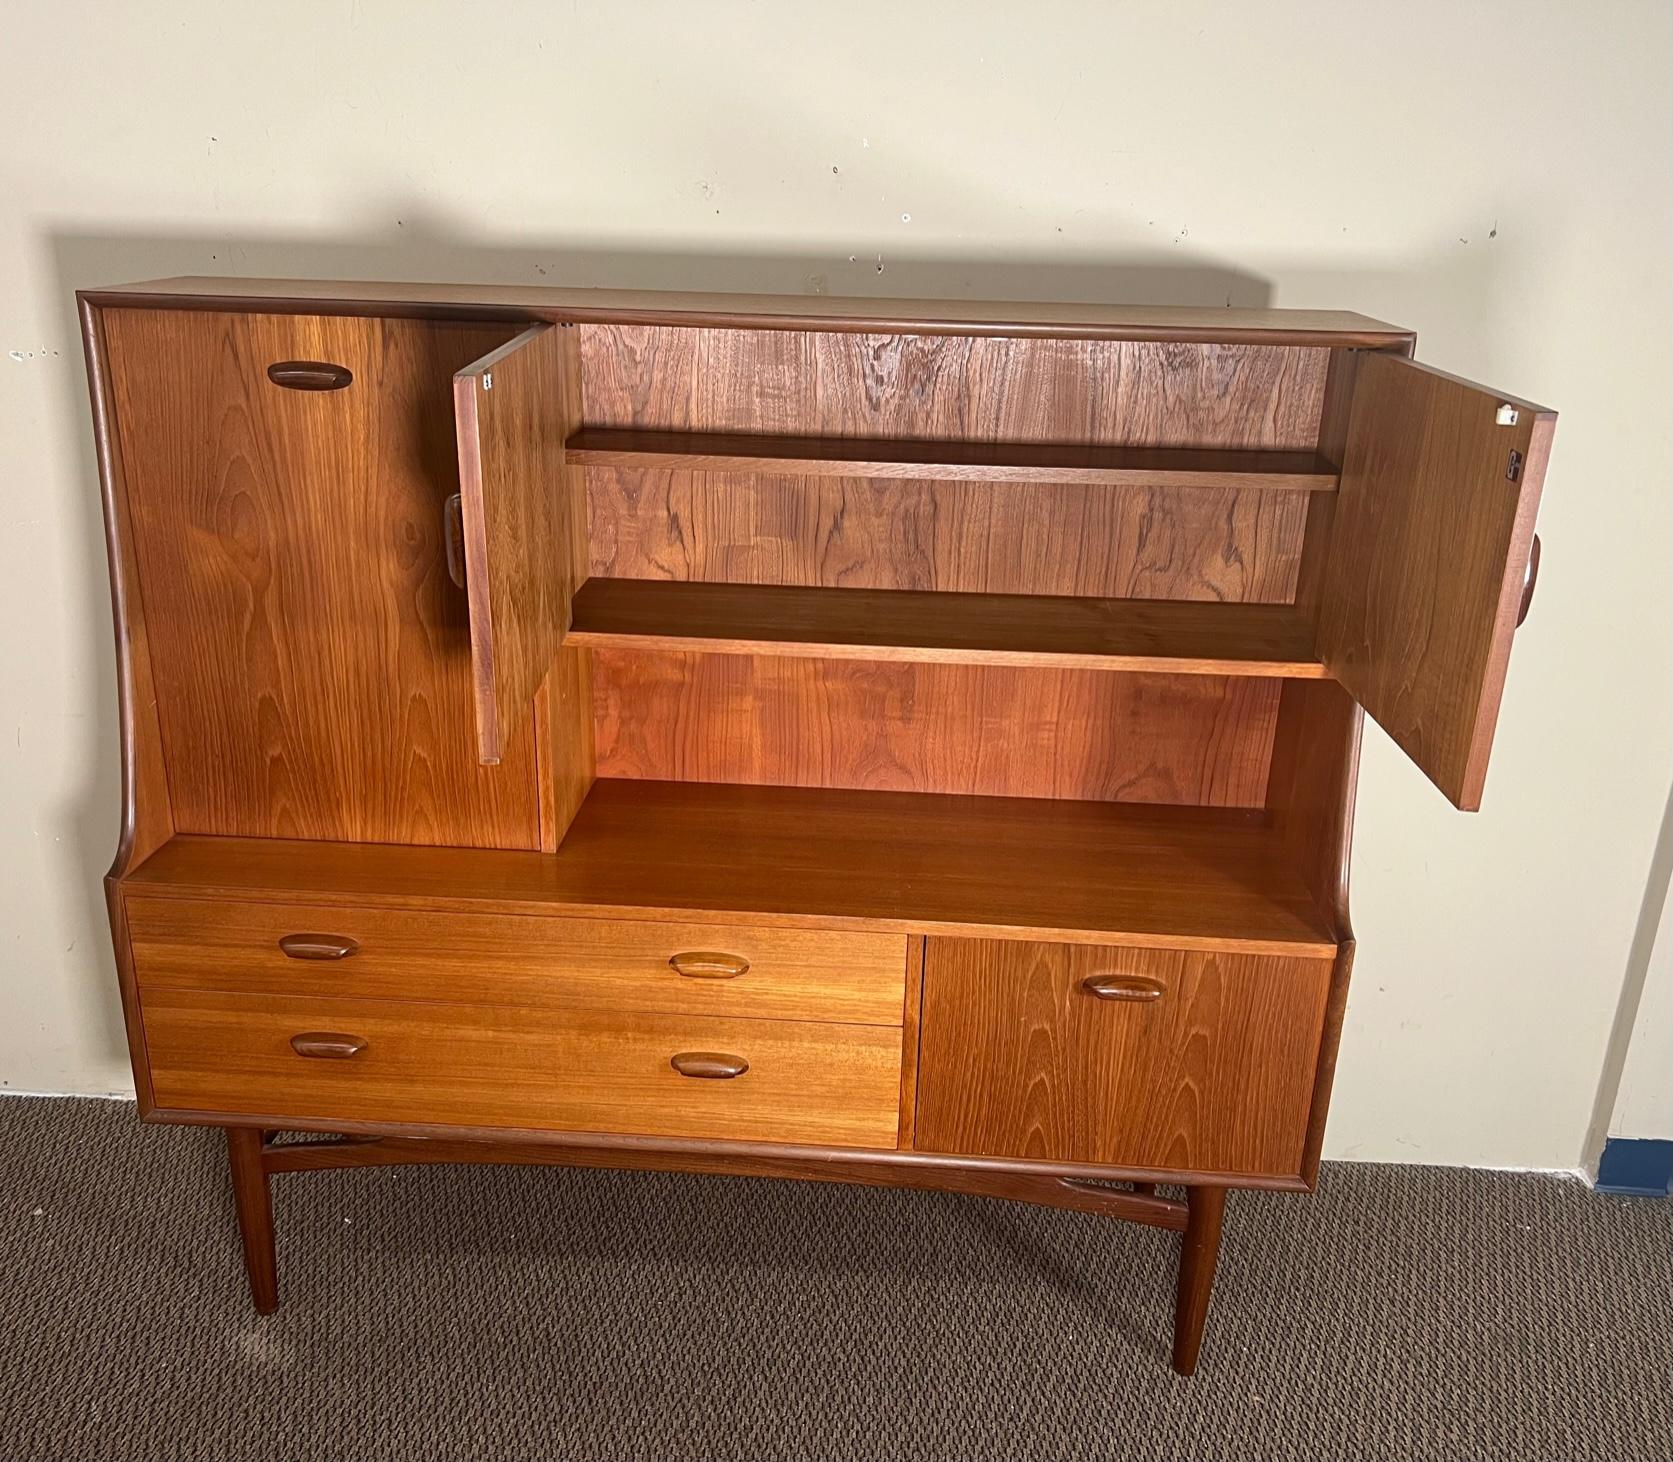 Mid-Century Modern versatile teak highboard by G Plan. Featuring an upper large drop down cabinet that can be used as a small desk and lower drop down cabinet or bar.
Very good condition. Screw hole on left side. Some spots on doors, chip on right